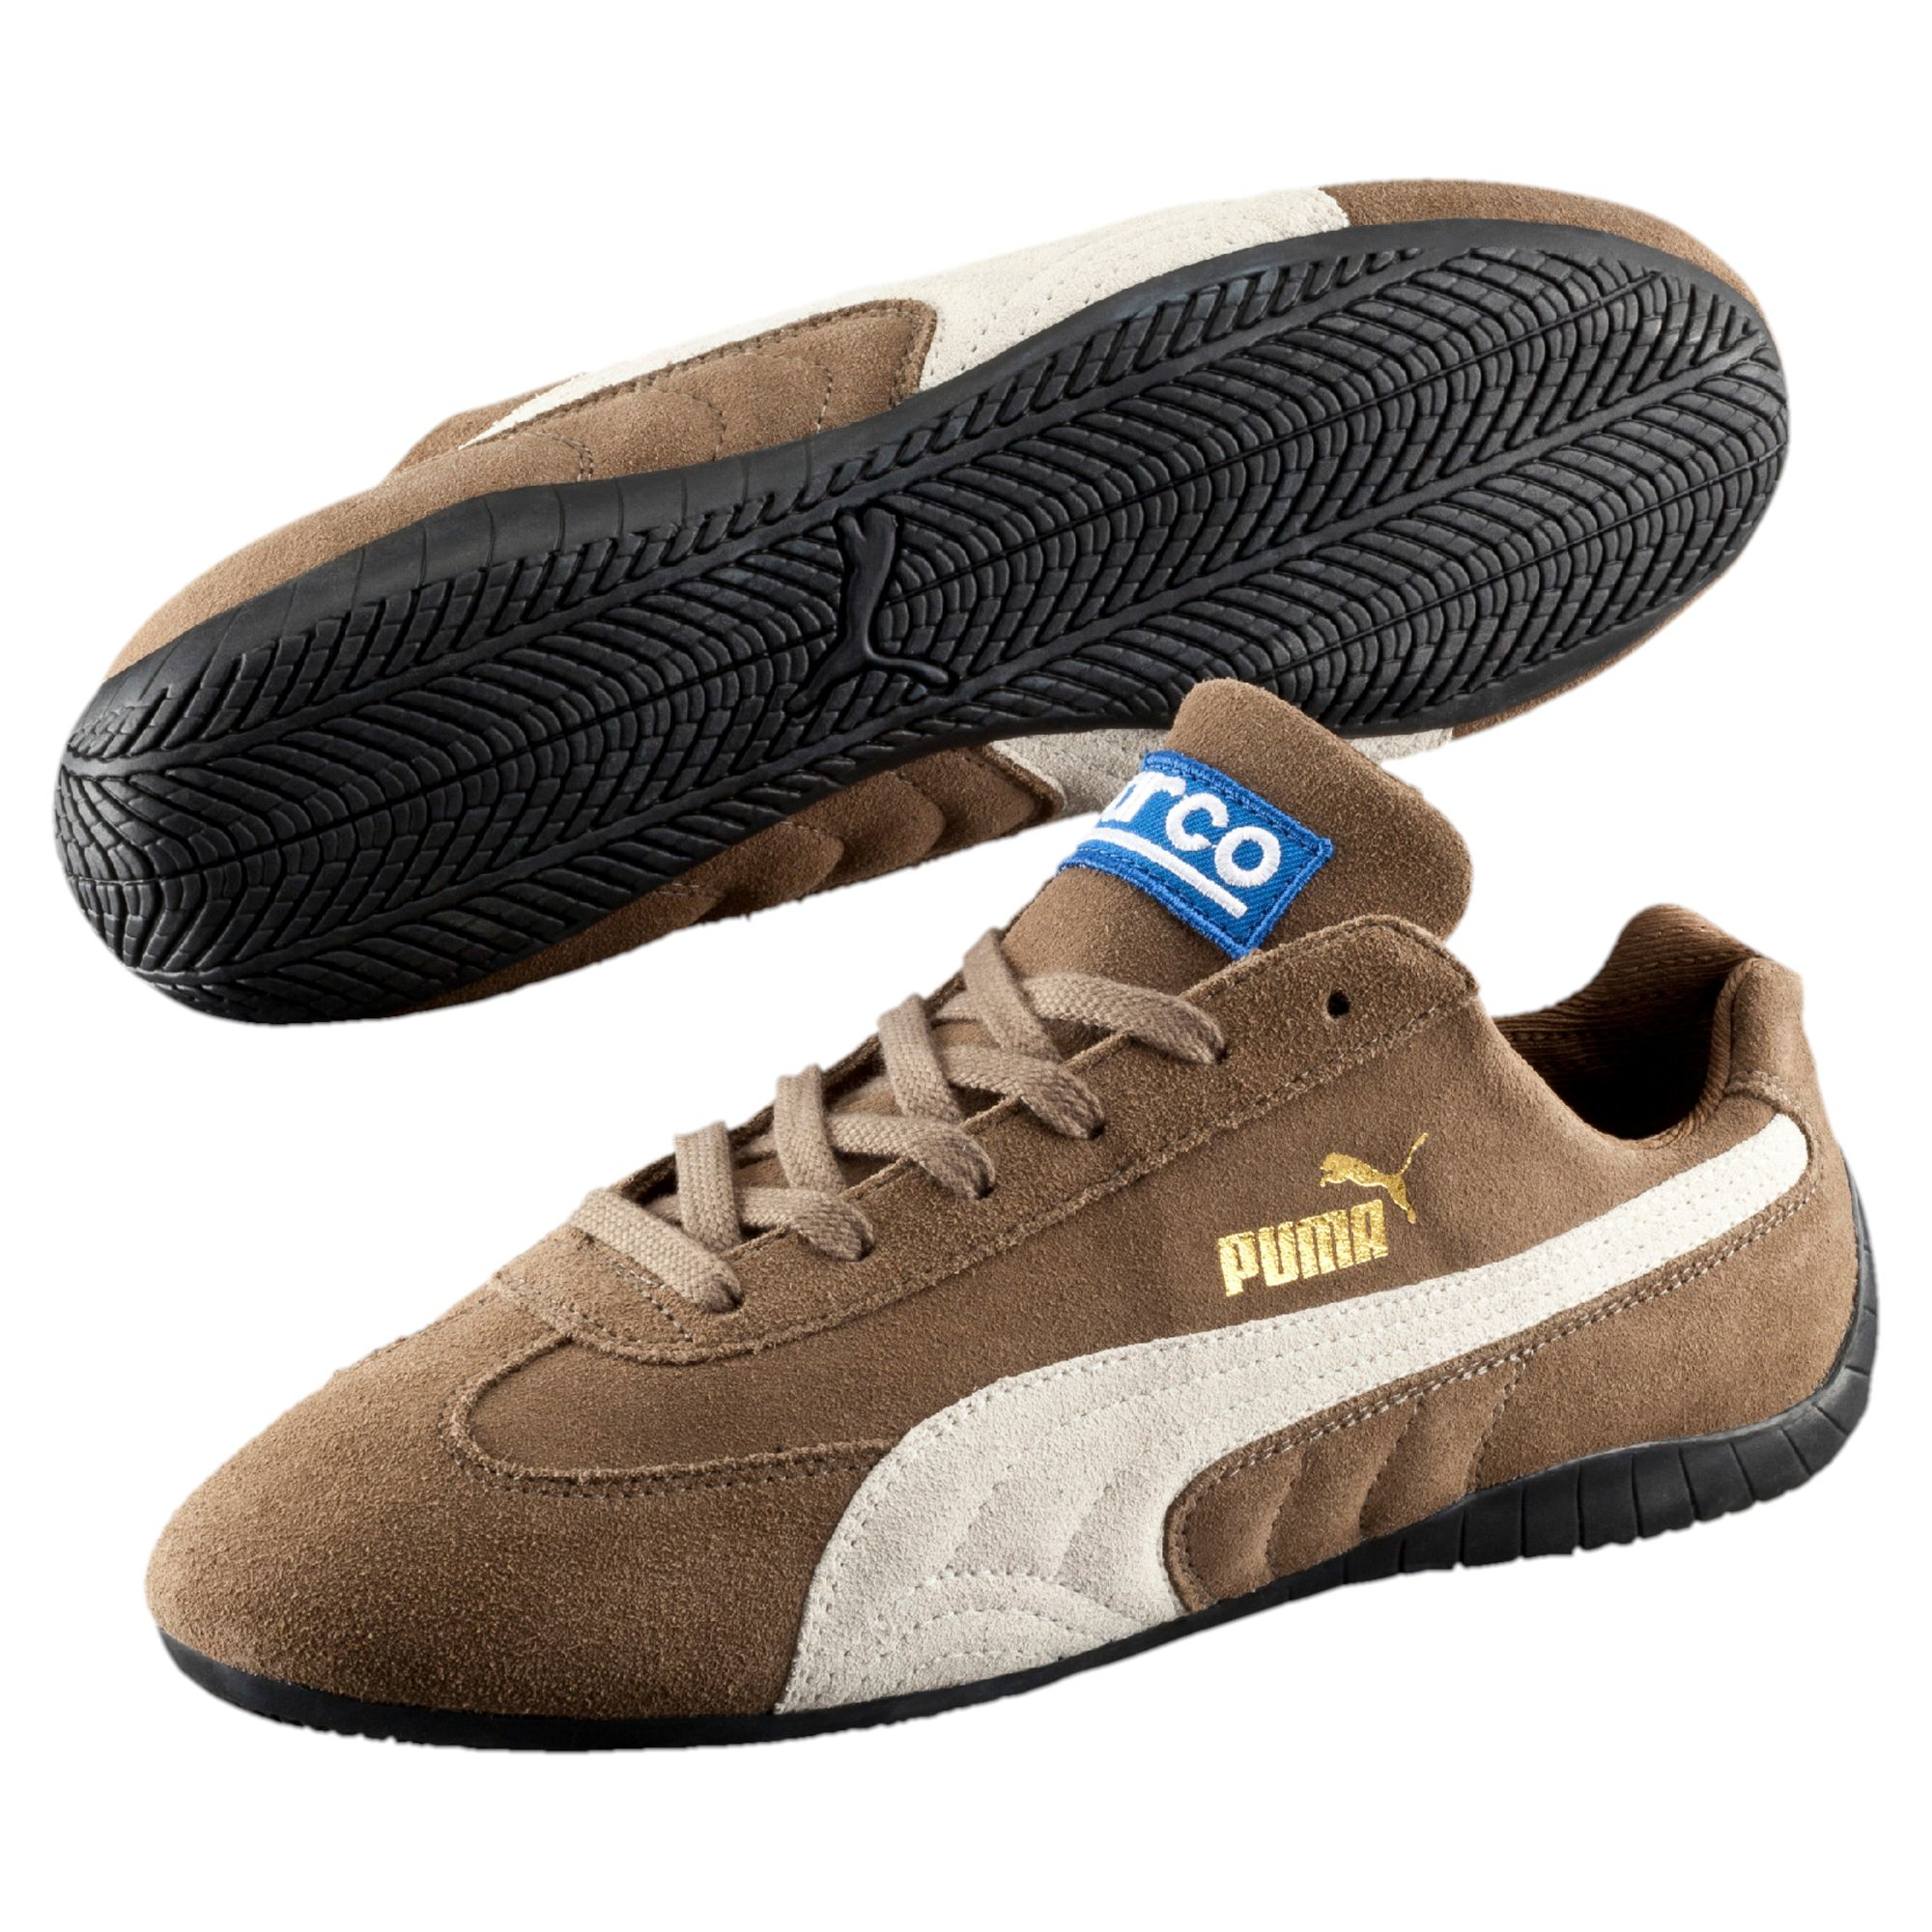 PUMA Suede Speed Cat Shoes in Natural for Men - Lyst